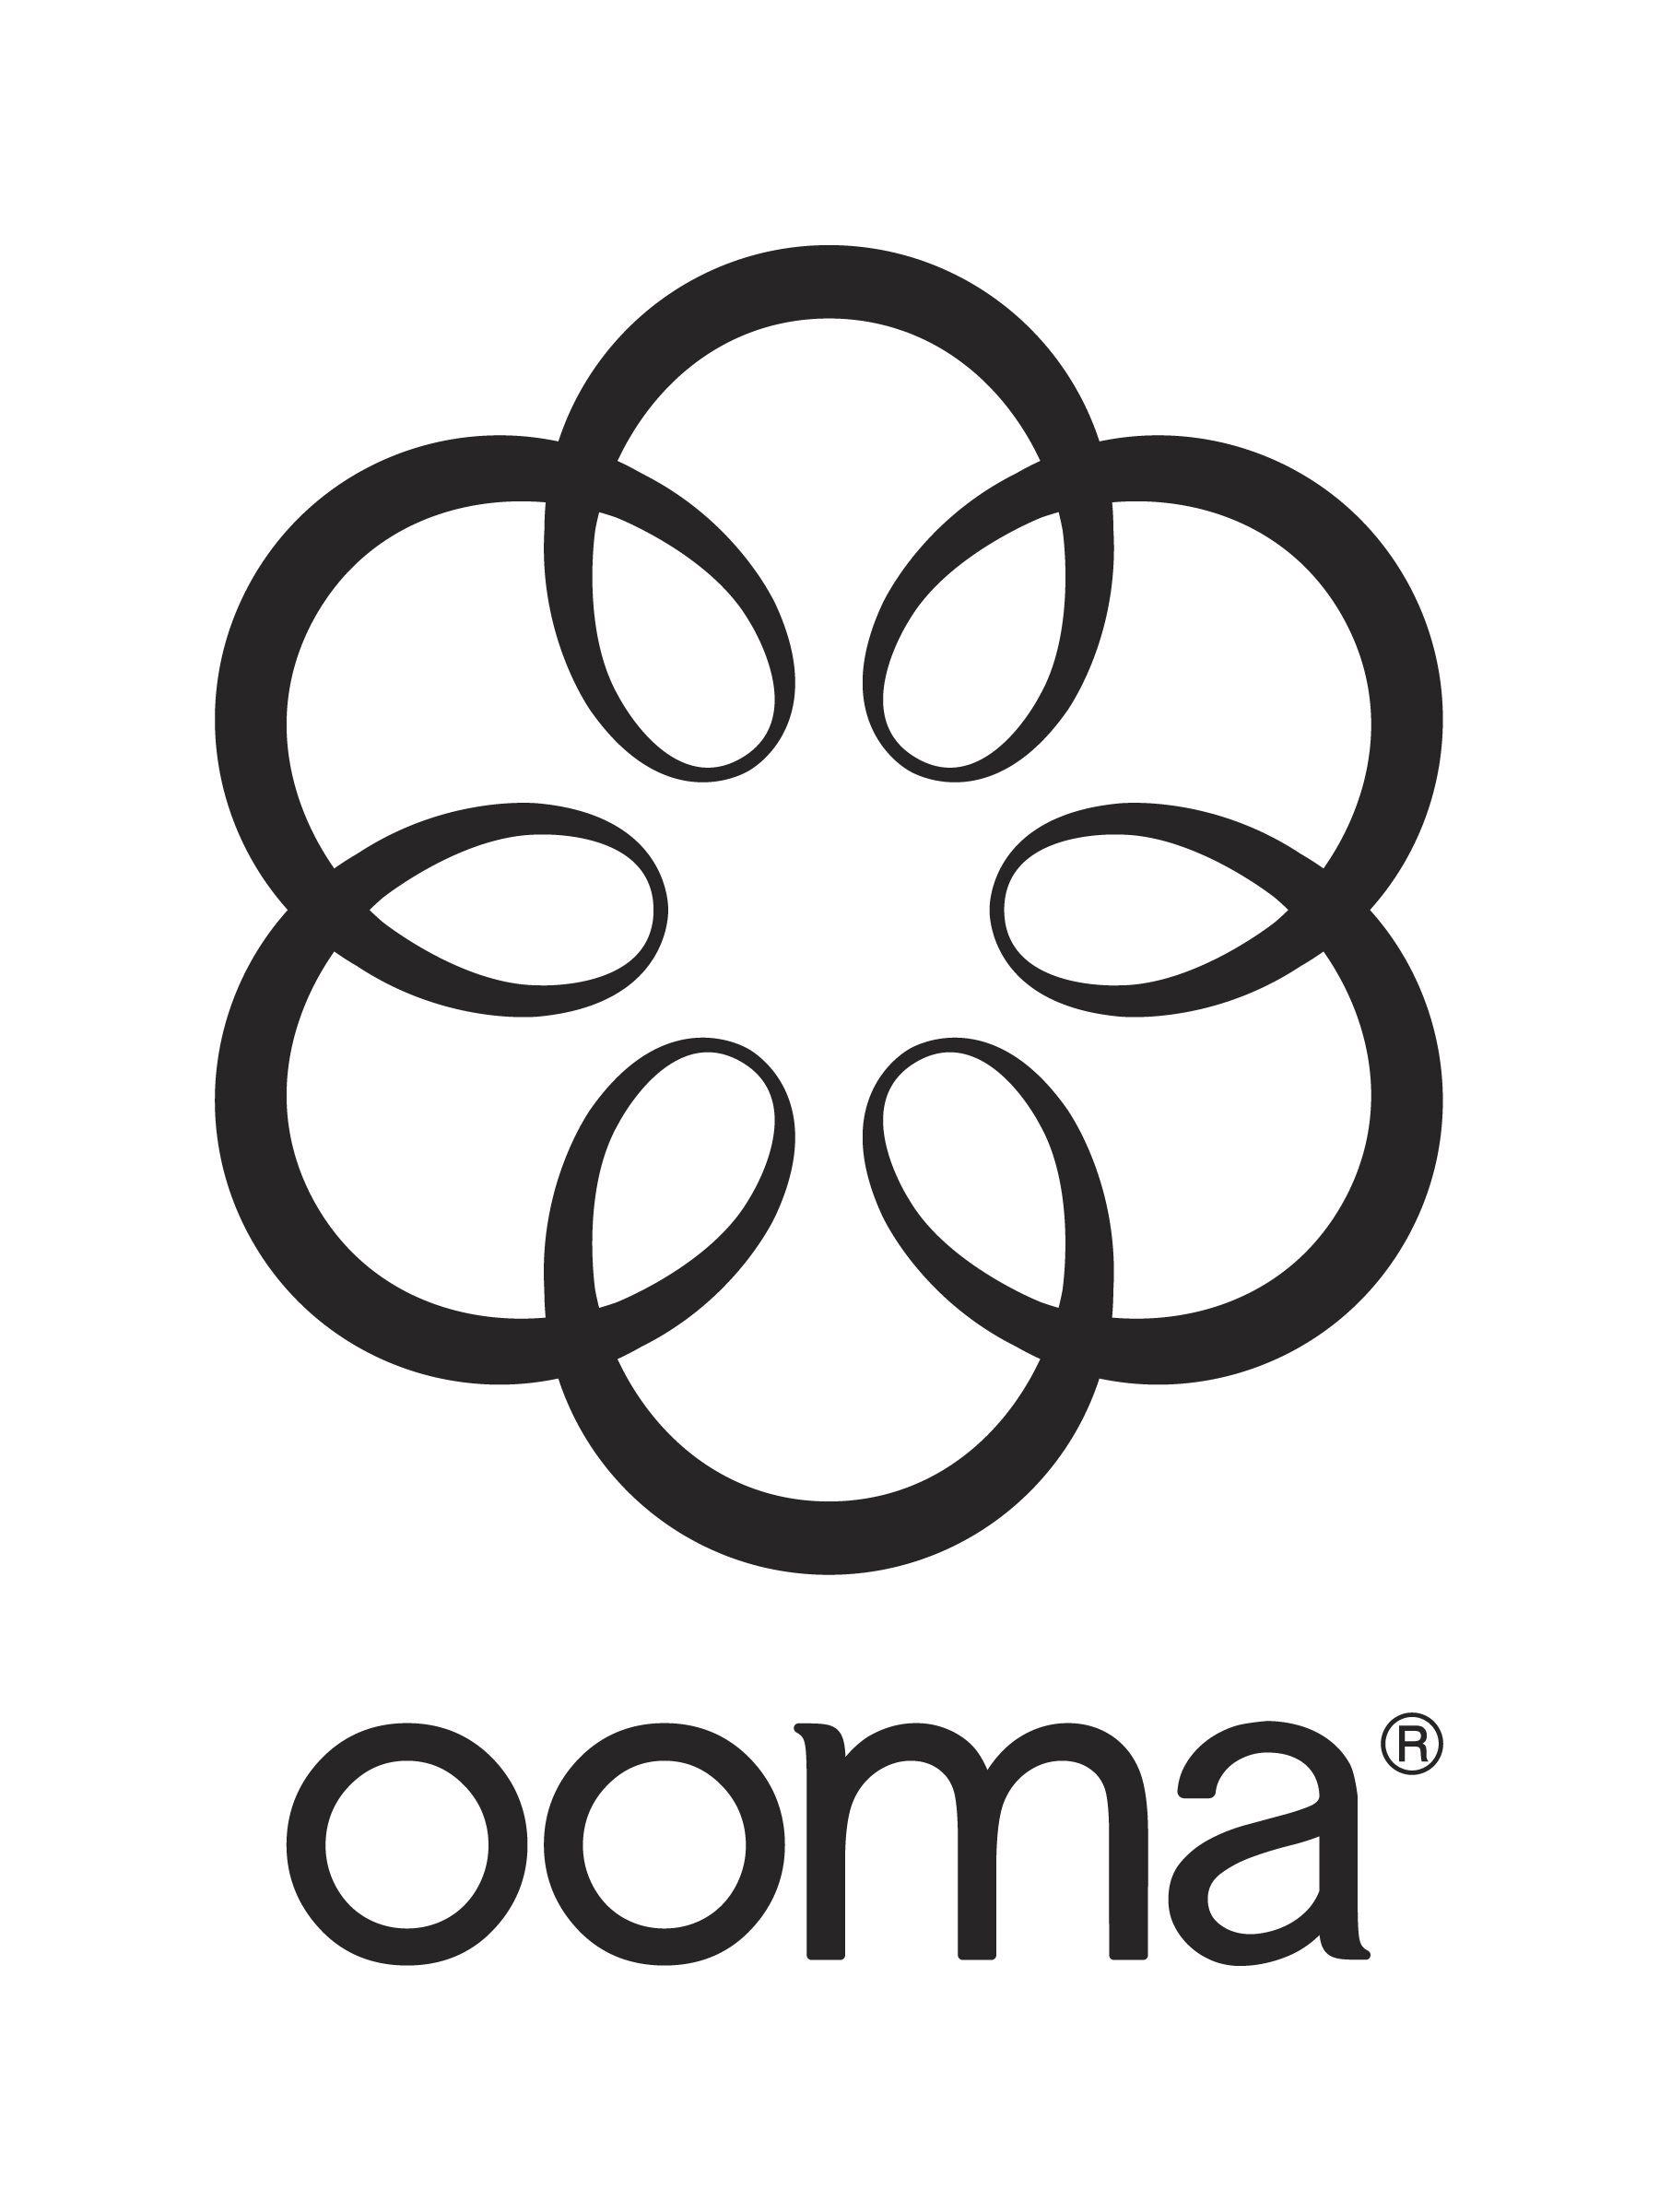 Ooma Logo - Press Assets.com solutions for home and business